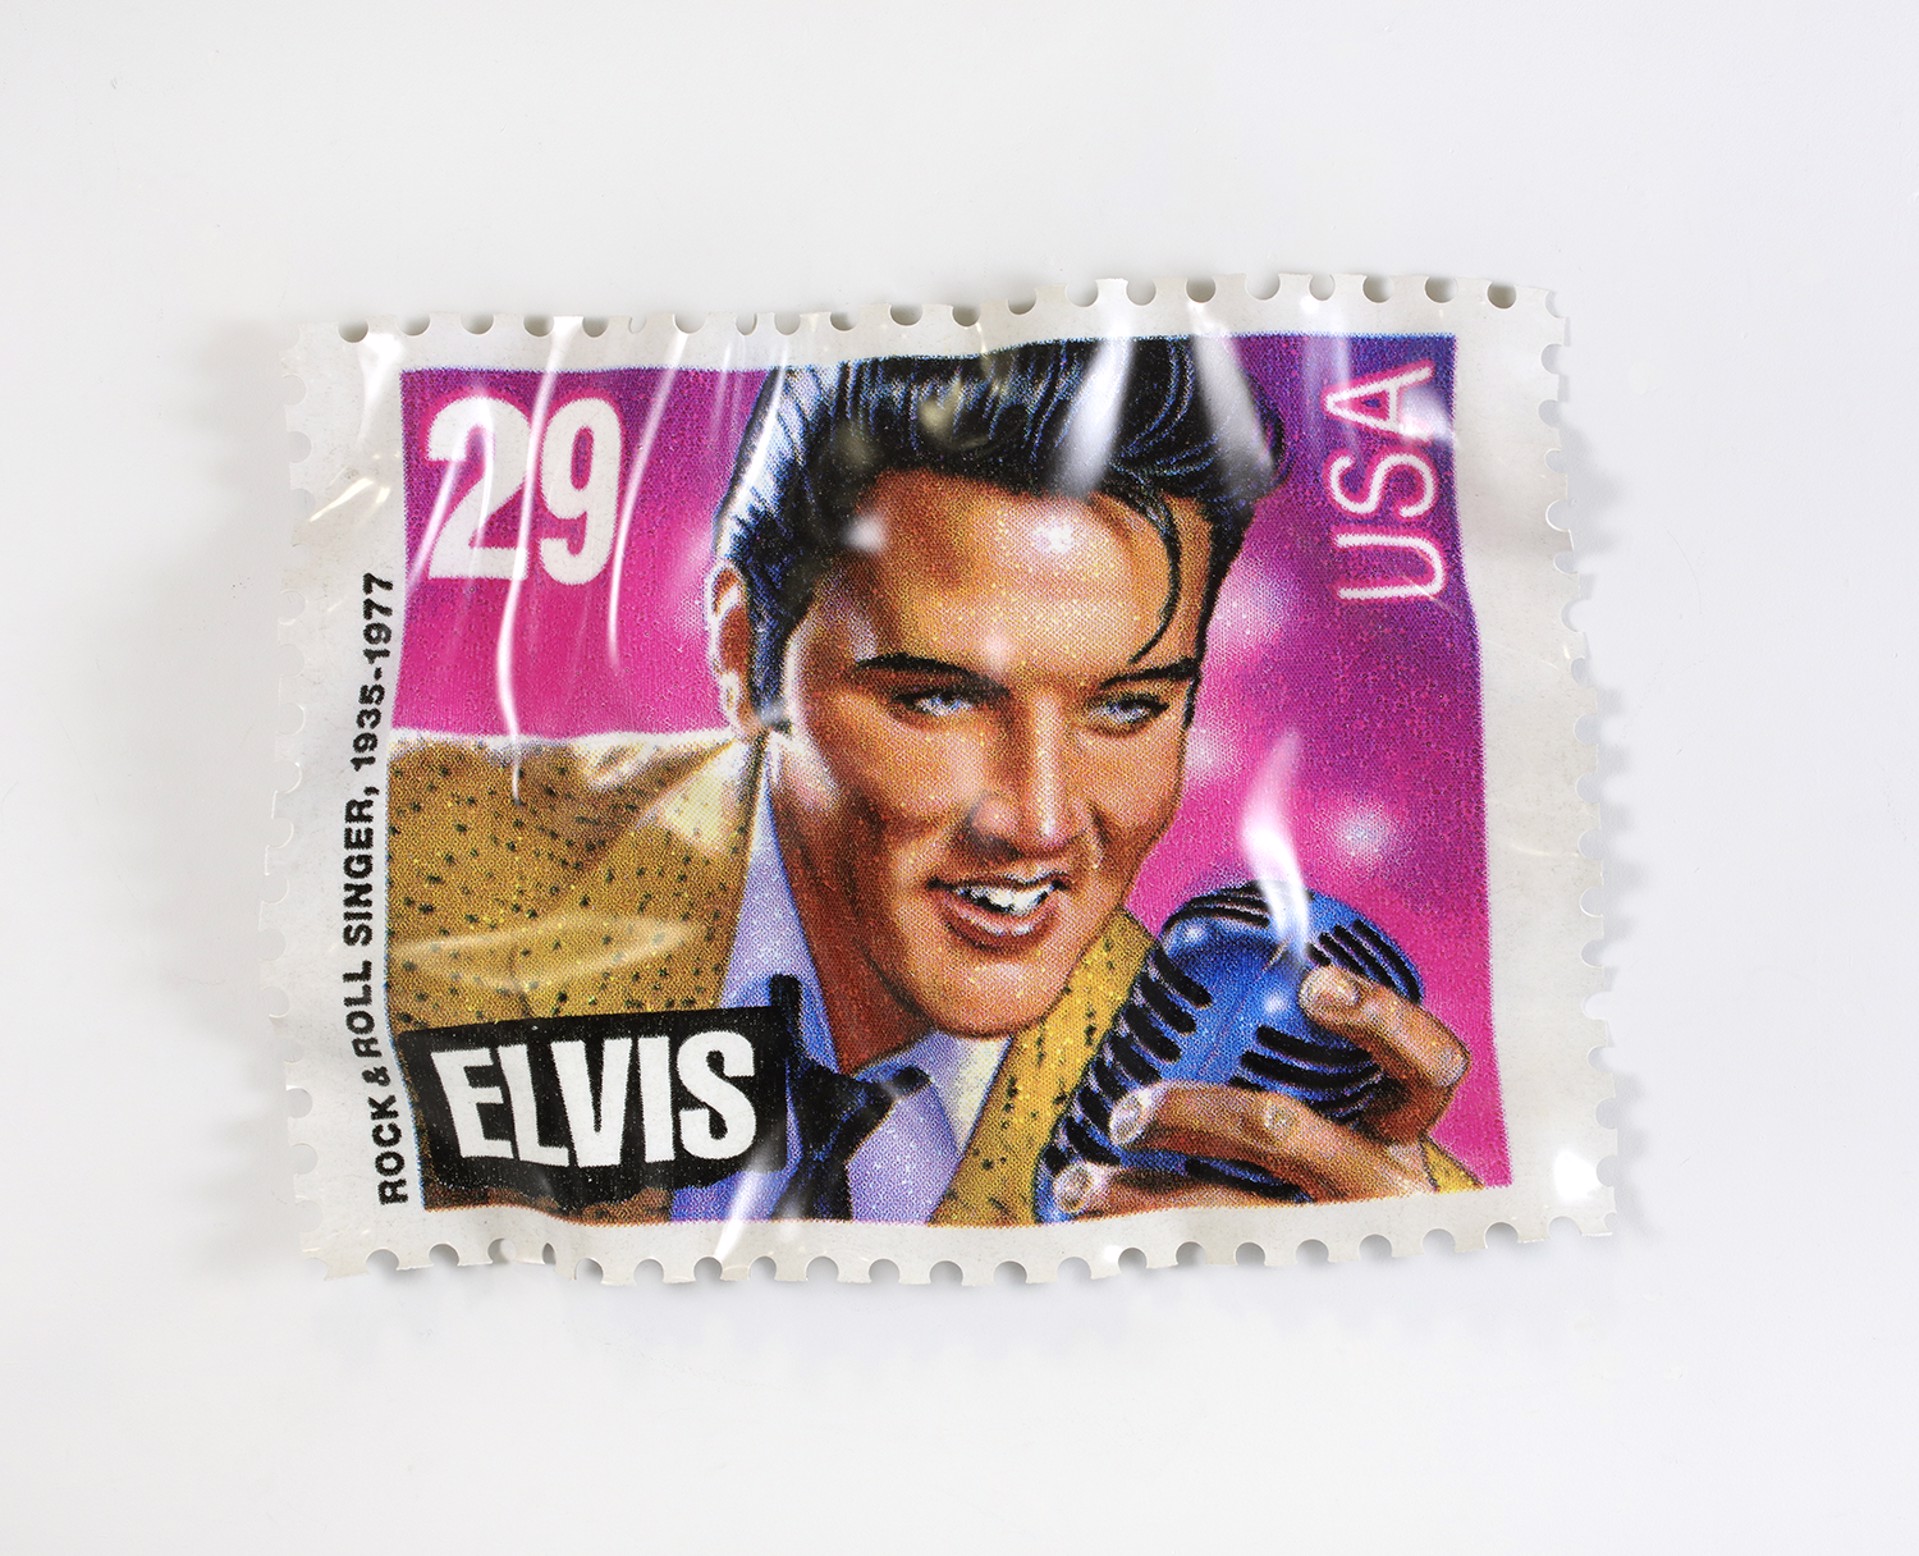 Elvis 29-Cent Stamp by Paul Rousso